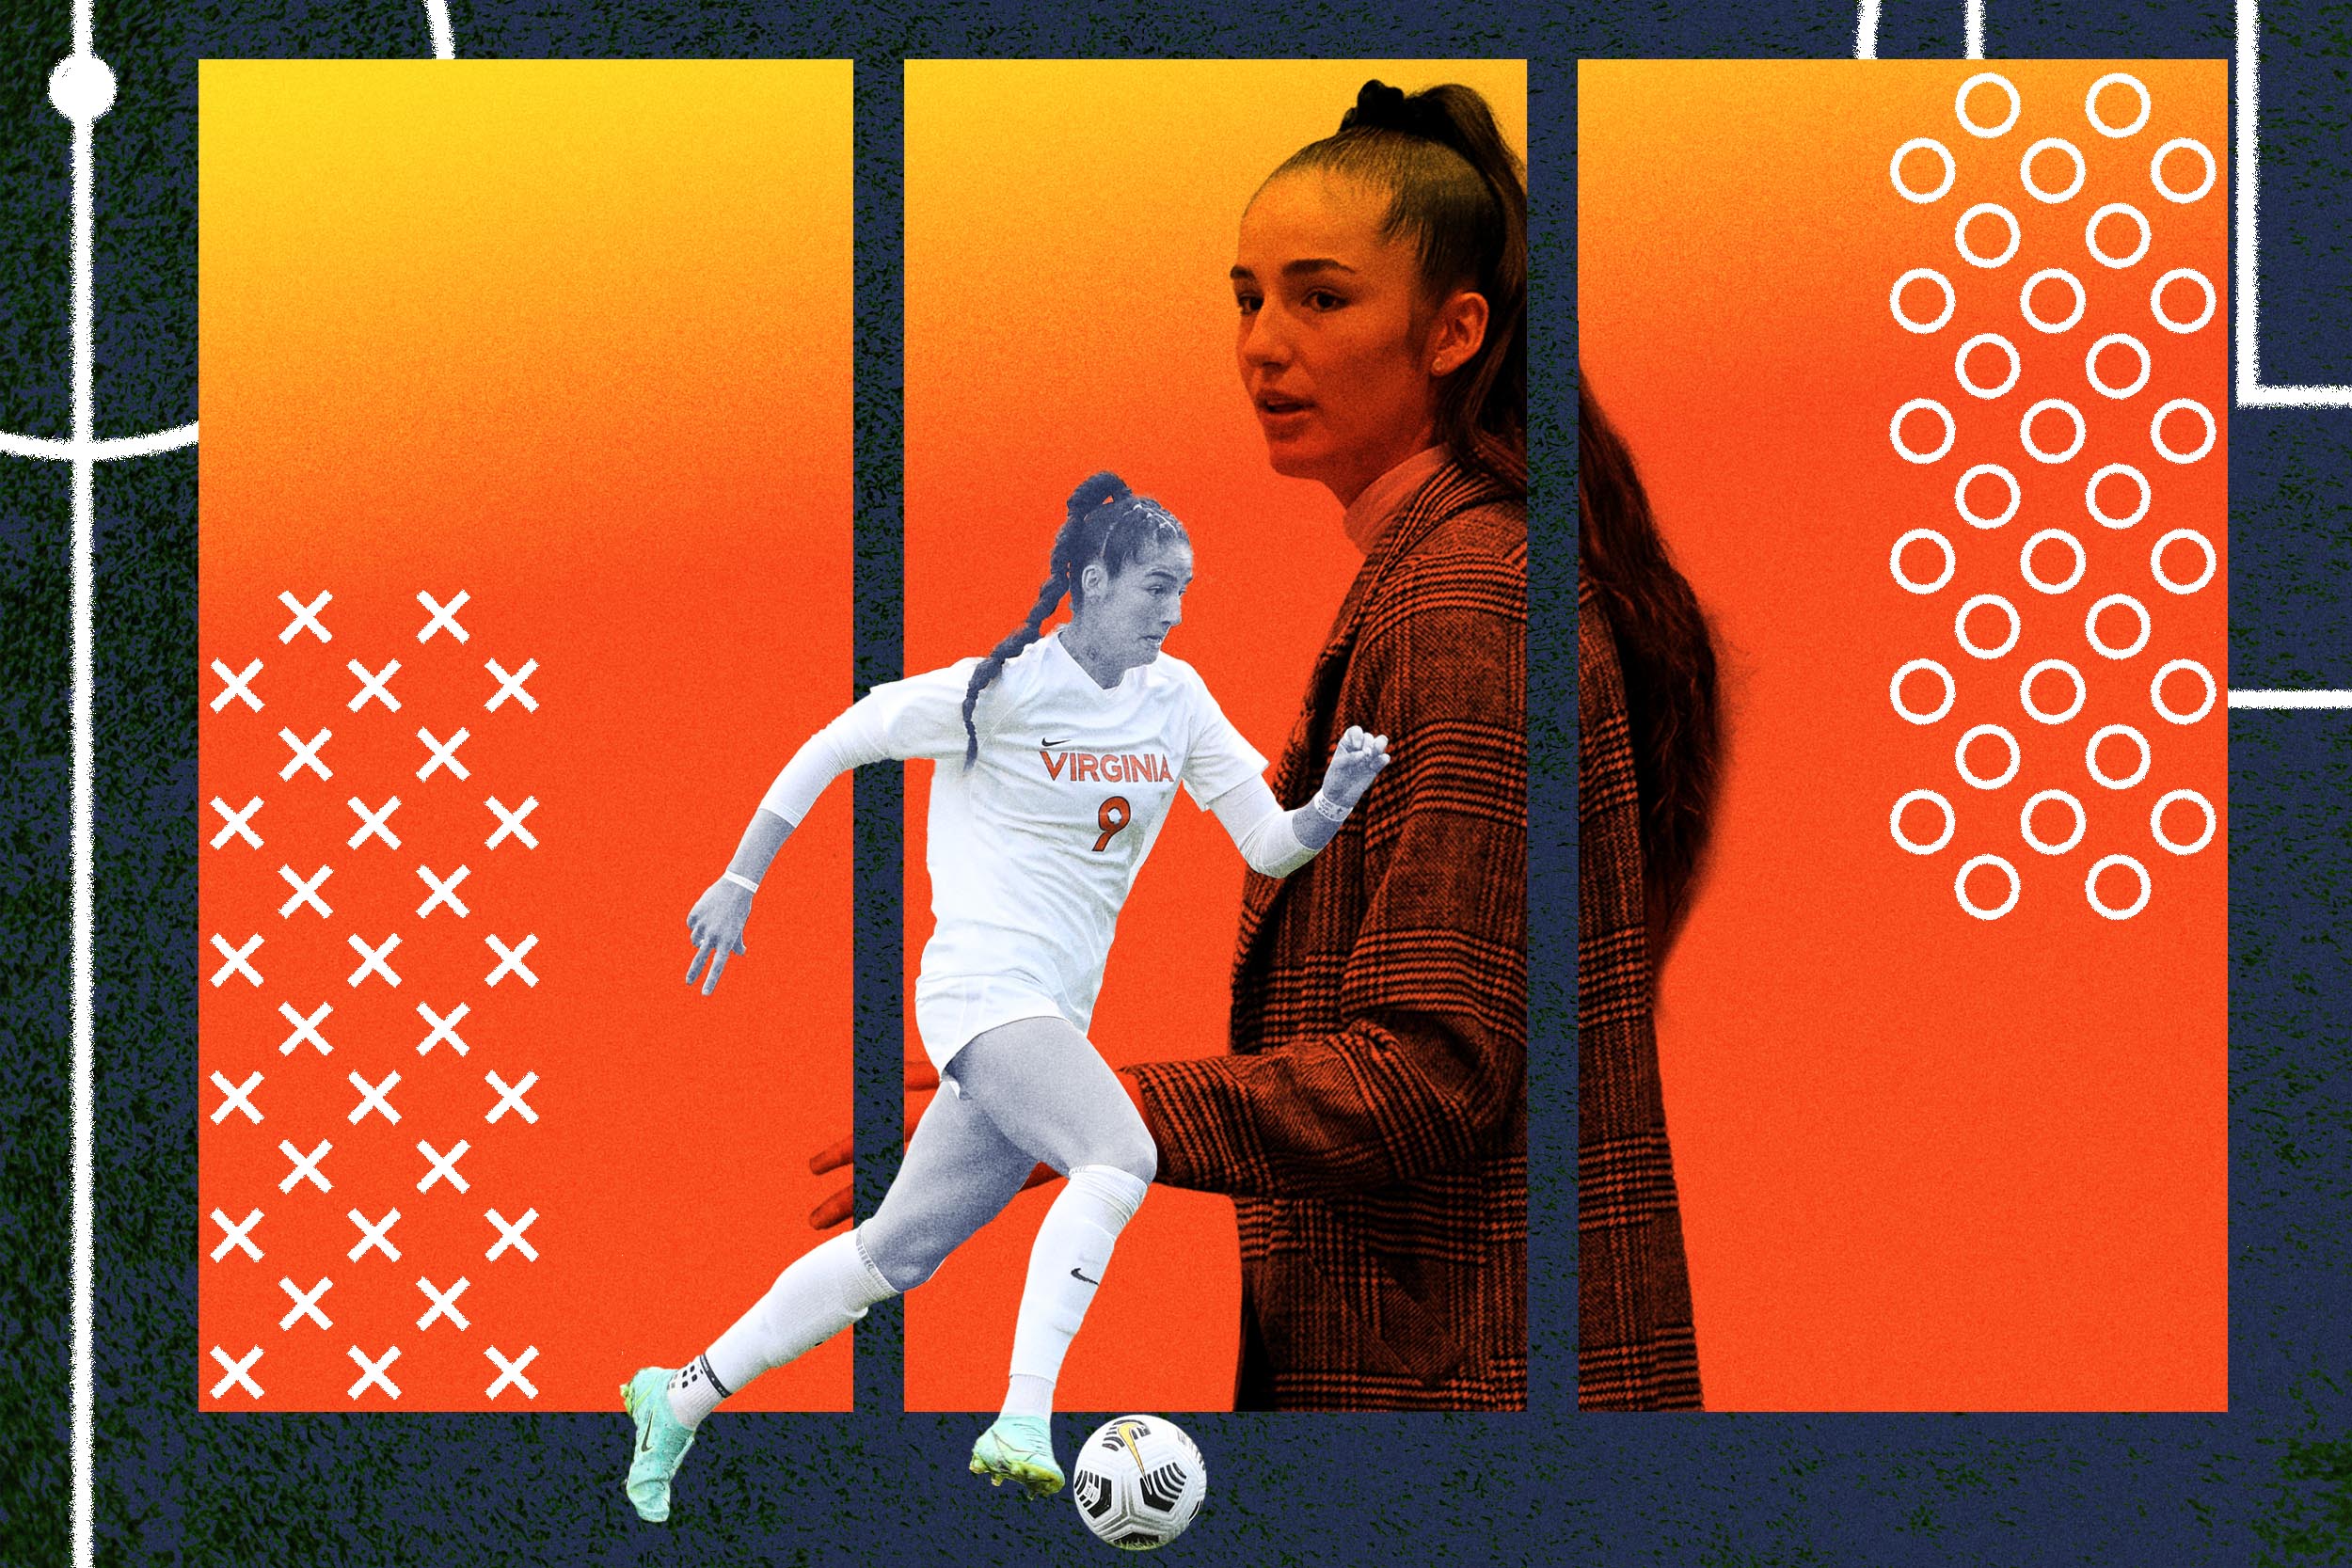 Collage of Diana Ordoñez one of her standing and one of her playing soccer